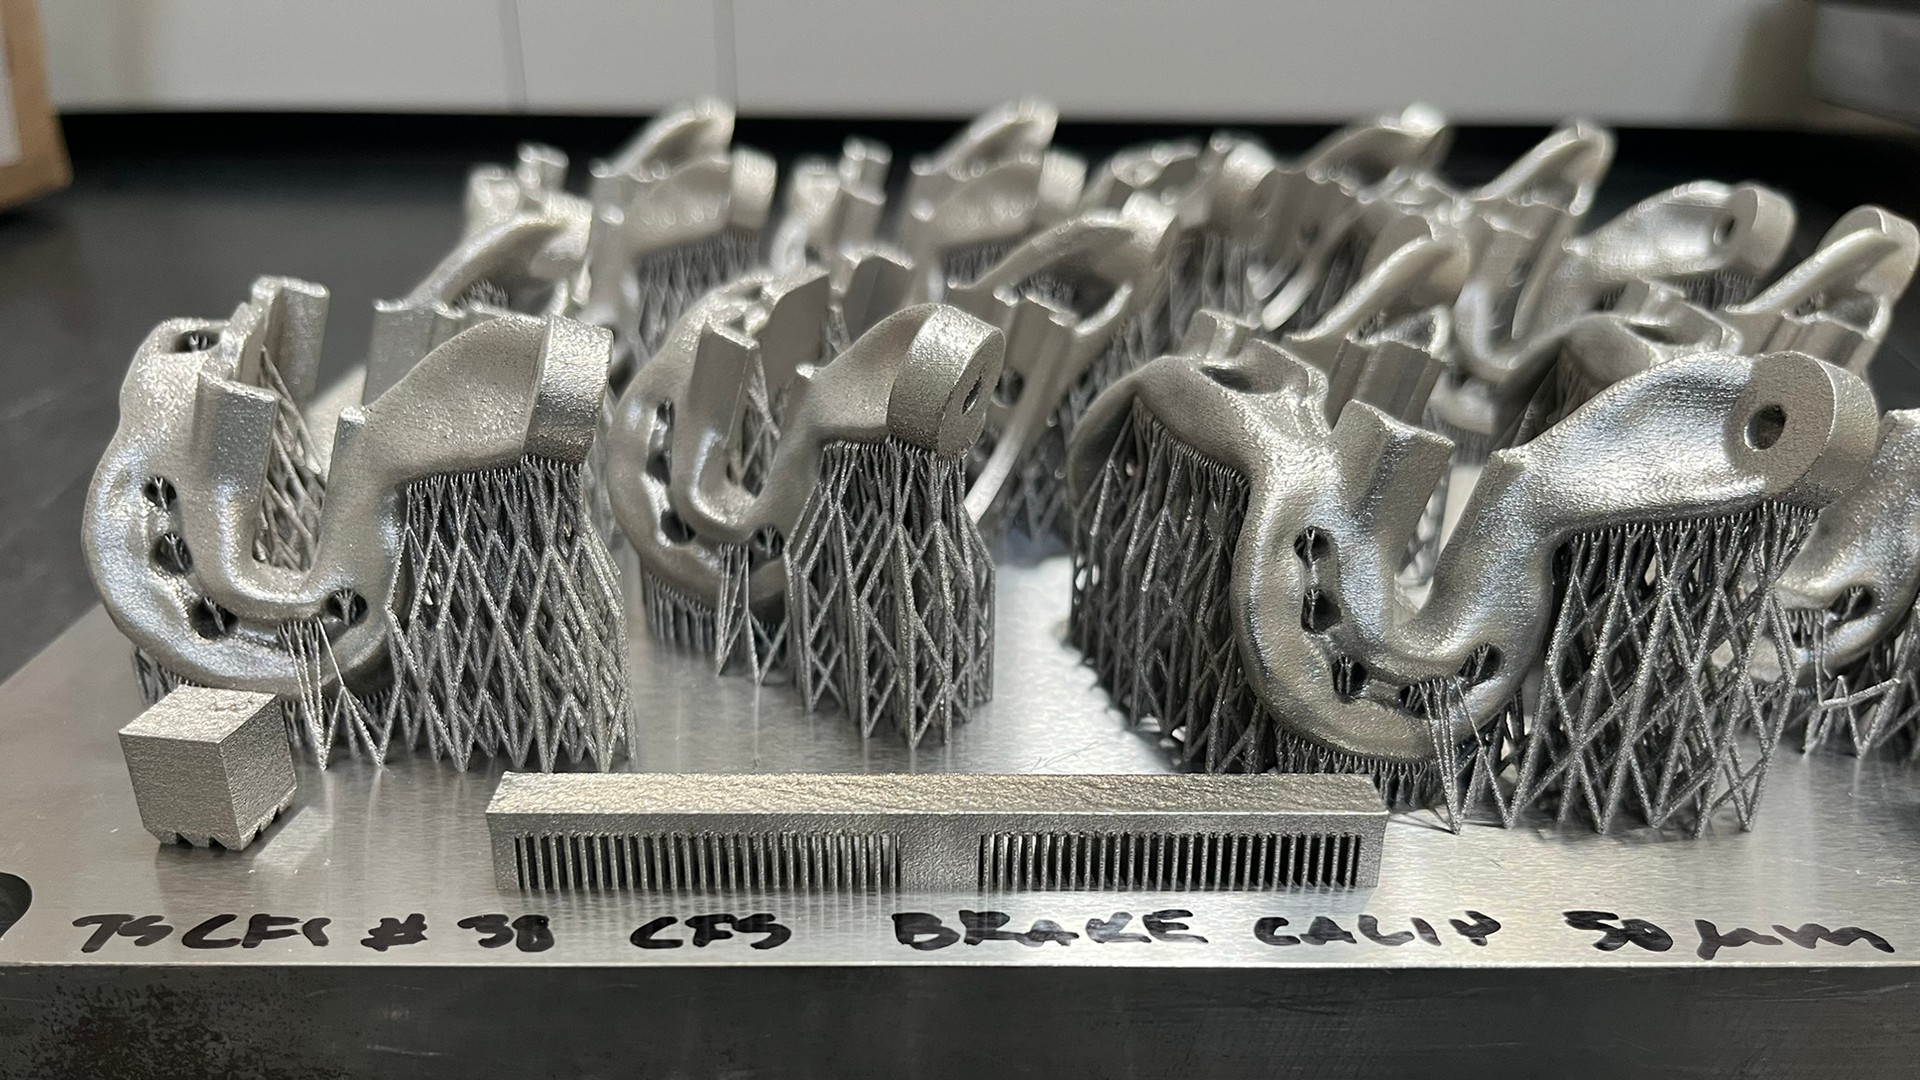 Metal parts produced with additive manufacturing.